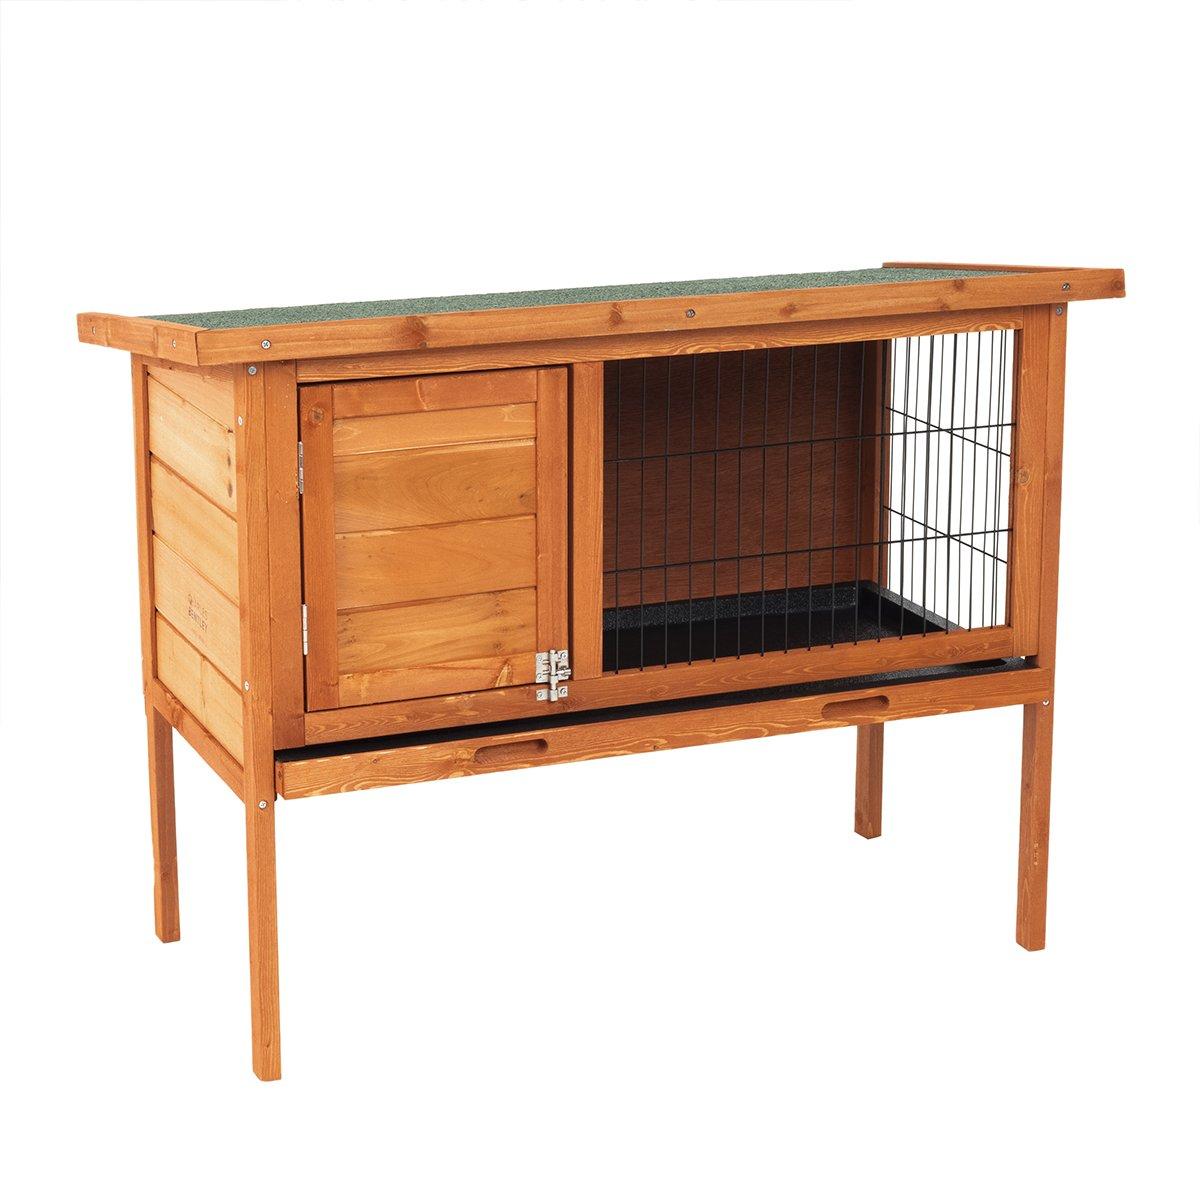 Wooden Pet Hutch Guinea Pig Cage Run w/ Cleaning Tray Grey/Brown